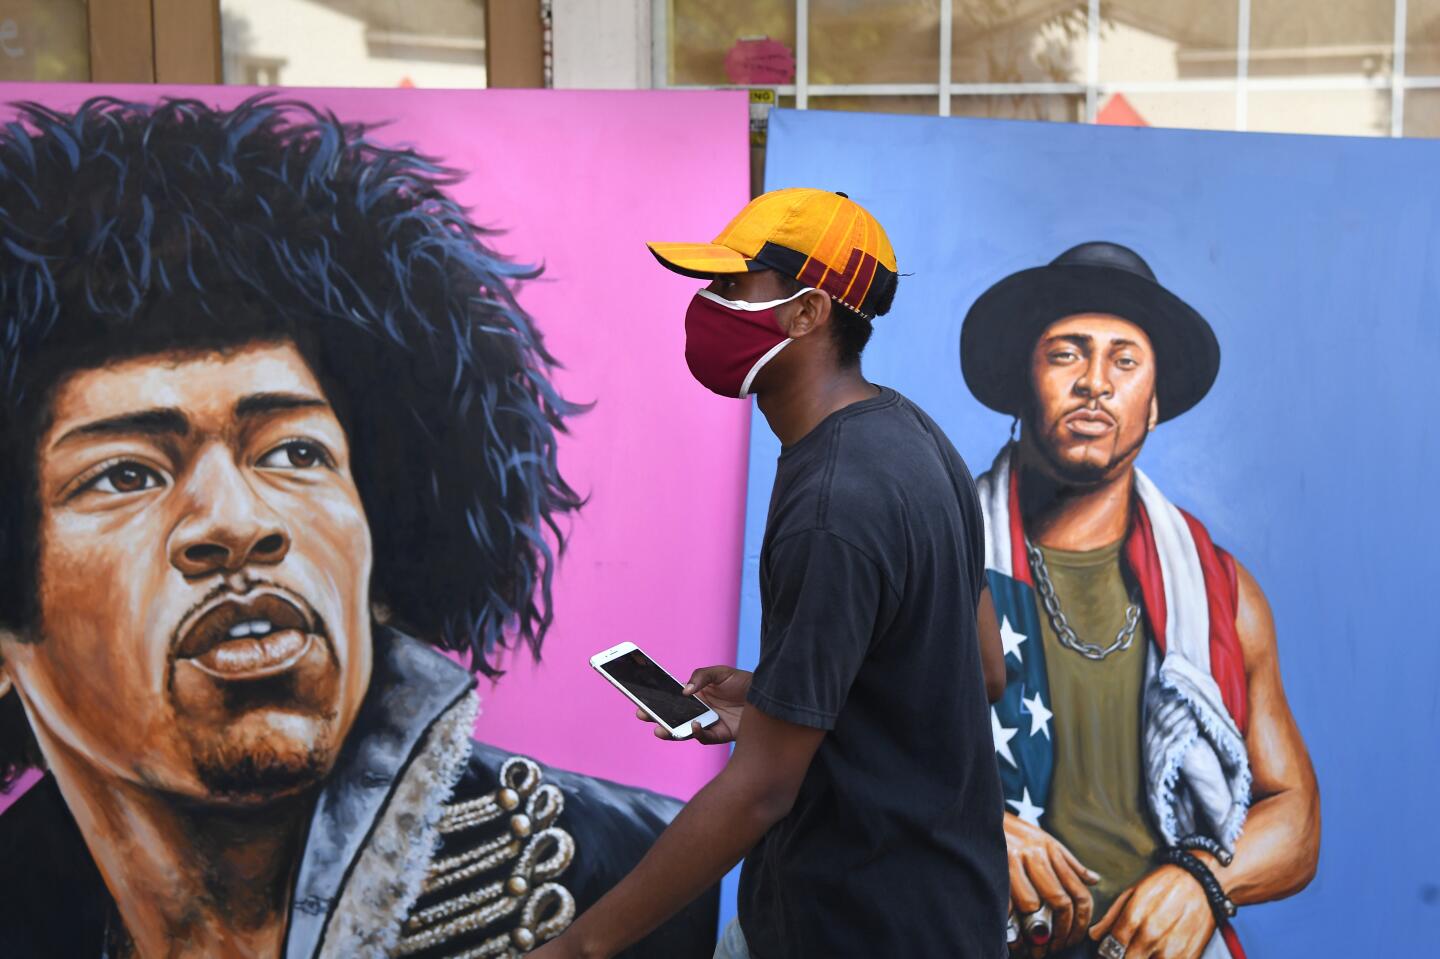 Arts and crafts were on sale during a Juneteenth celebration at Leimert Park